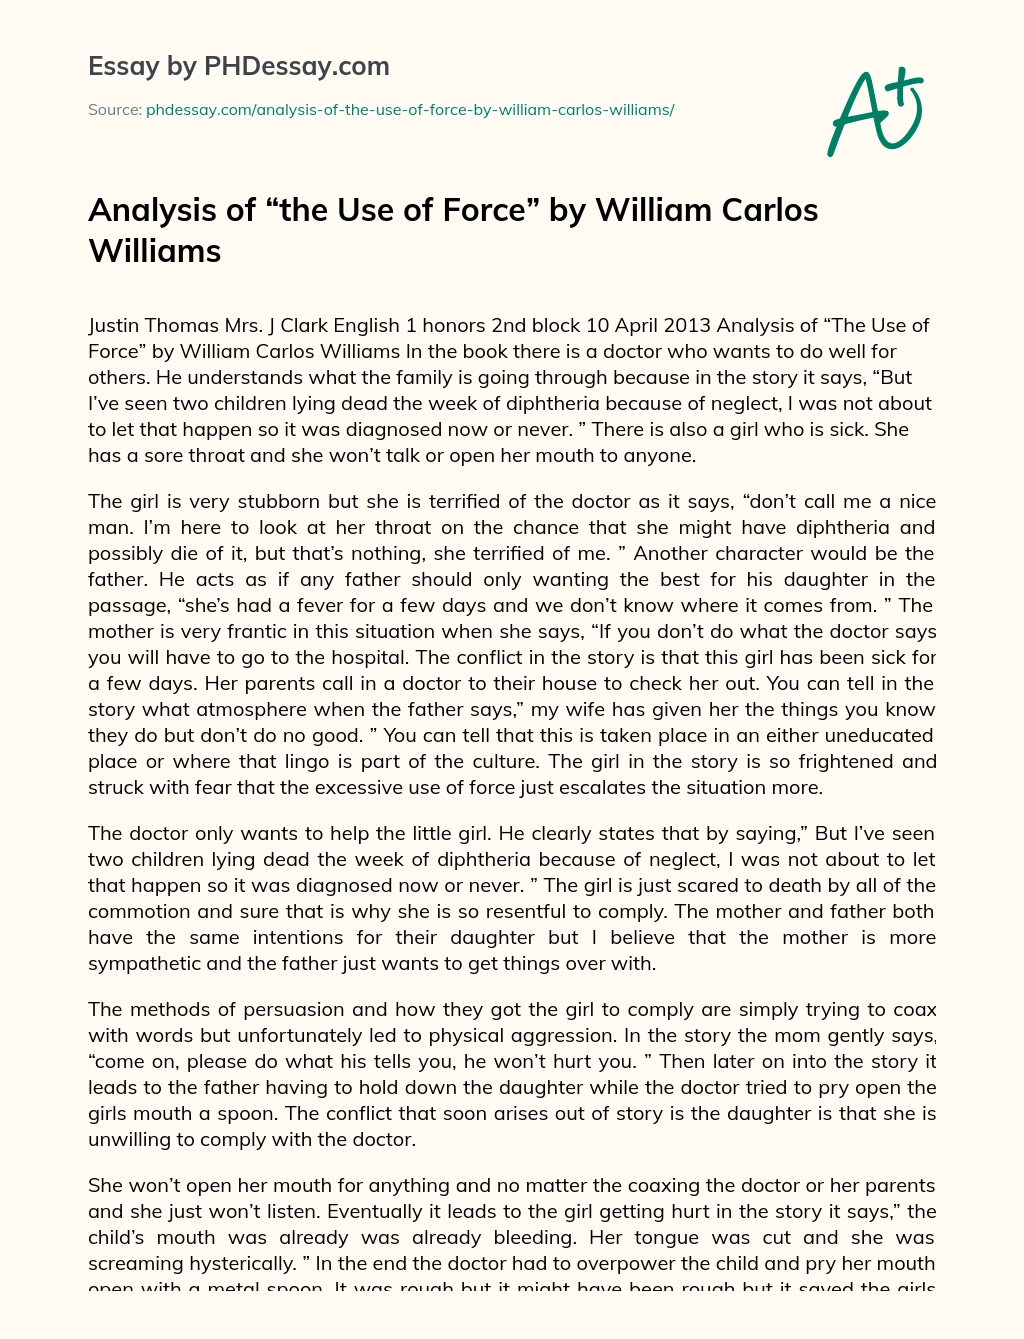 Analysis of “the Use of Force” by William Carlos Williams essay